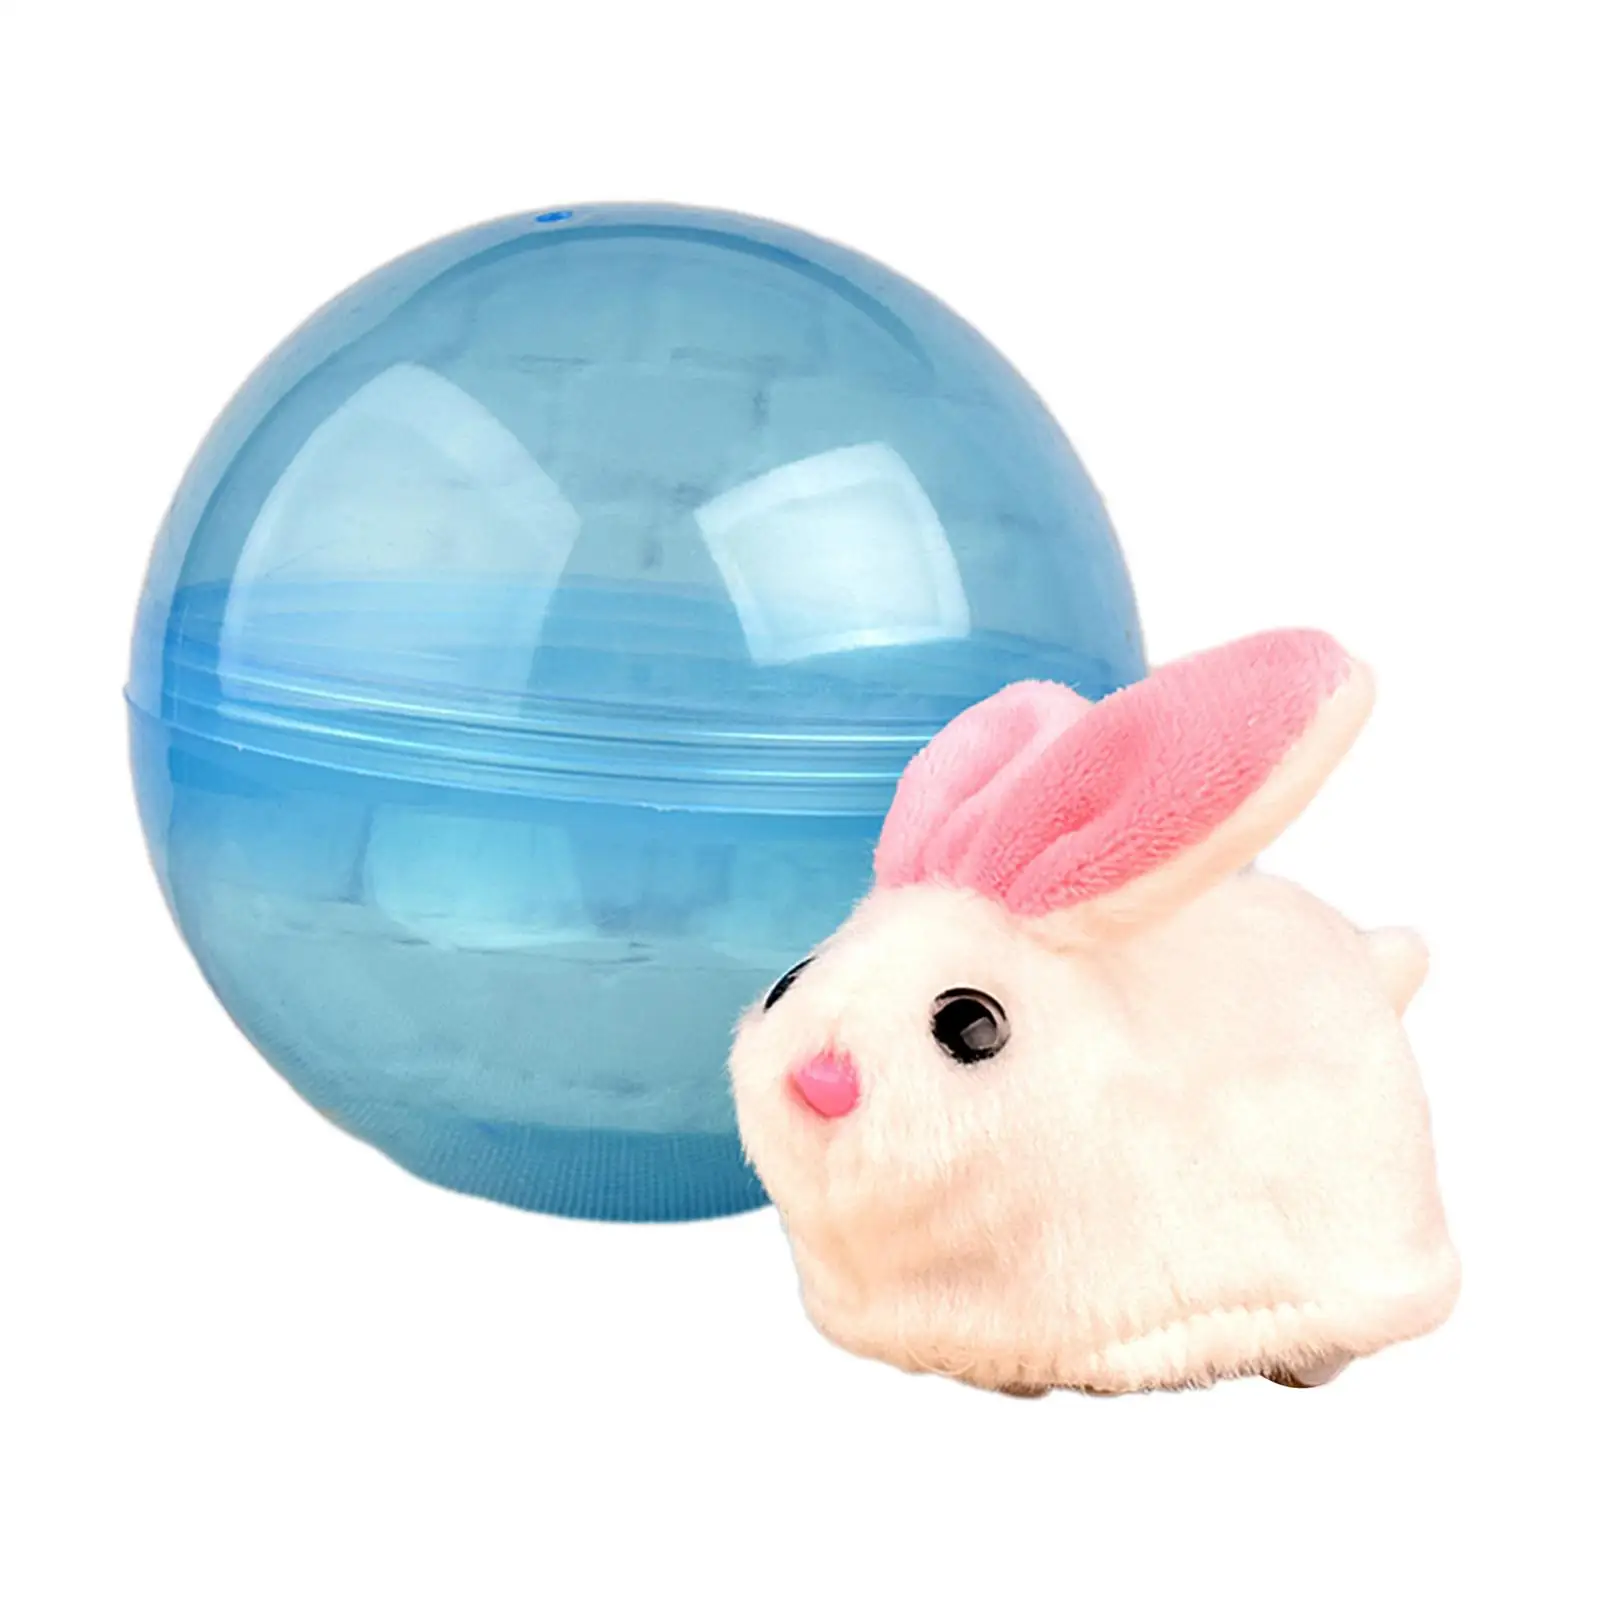 Electric Ball Toys Interactive Enjoy Fun Electronic Pets Toy Early Educatioanal Toys for Kids Boys Children Girls Gifts